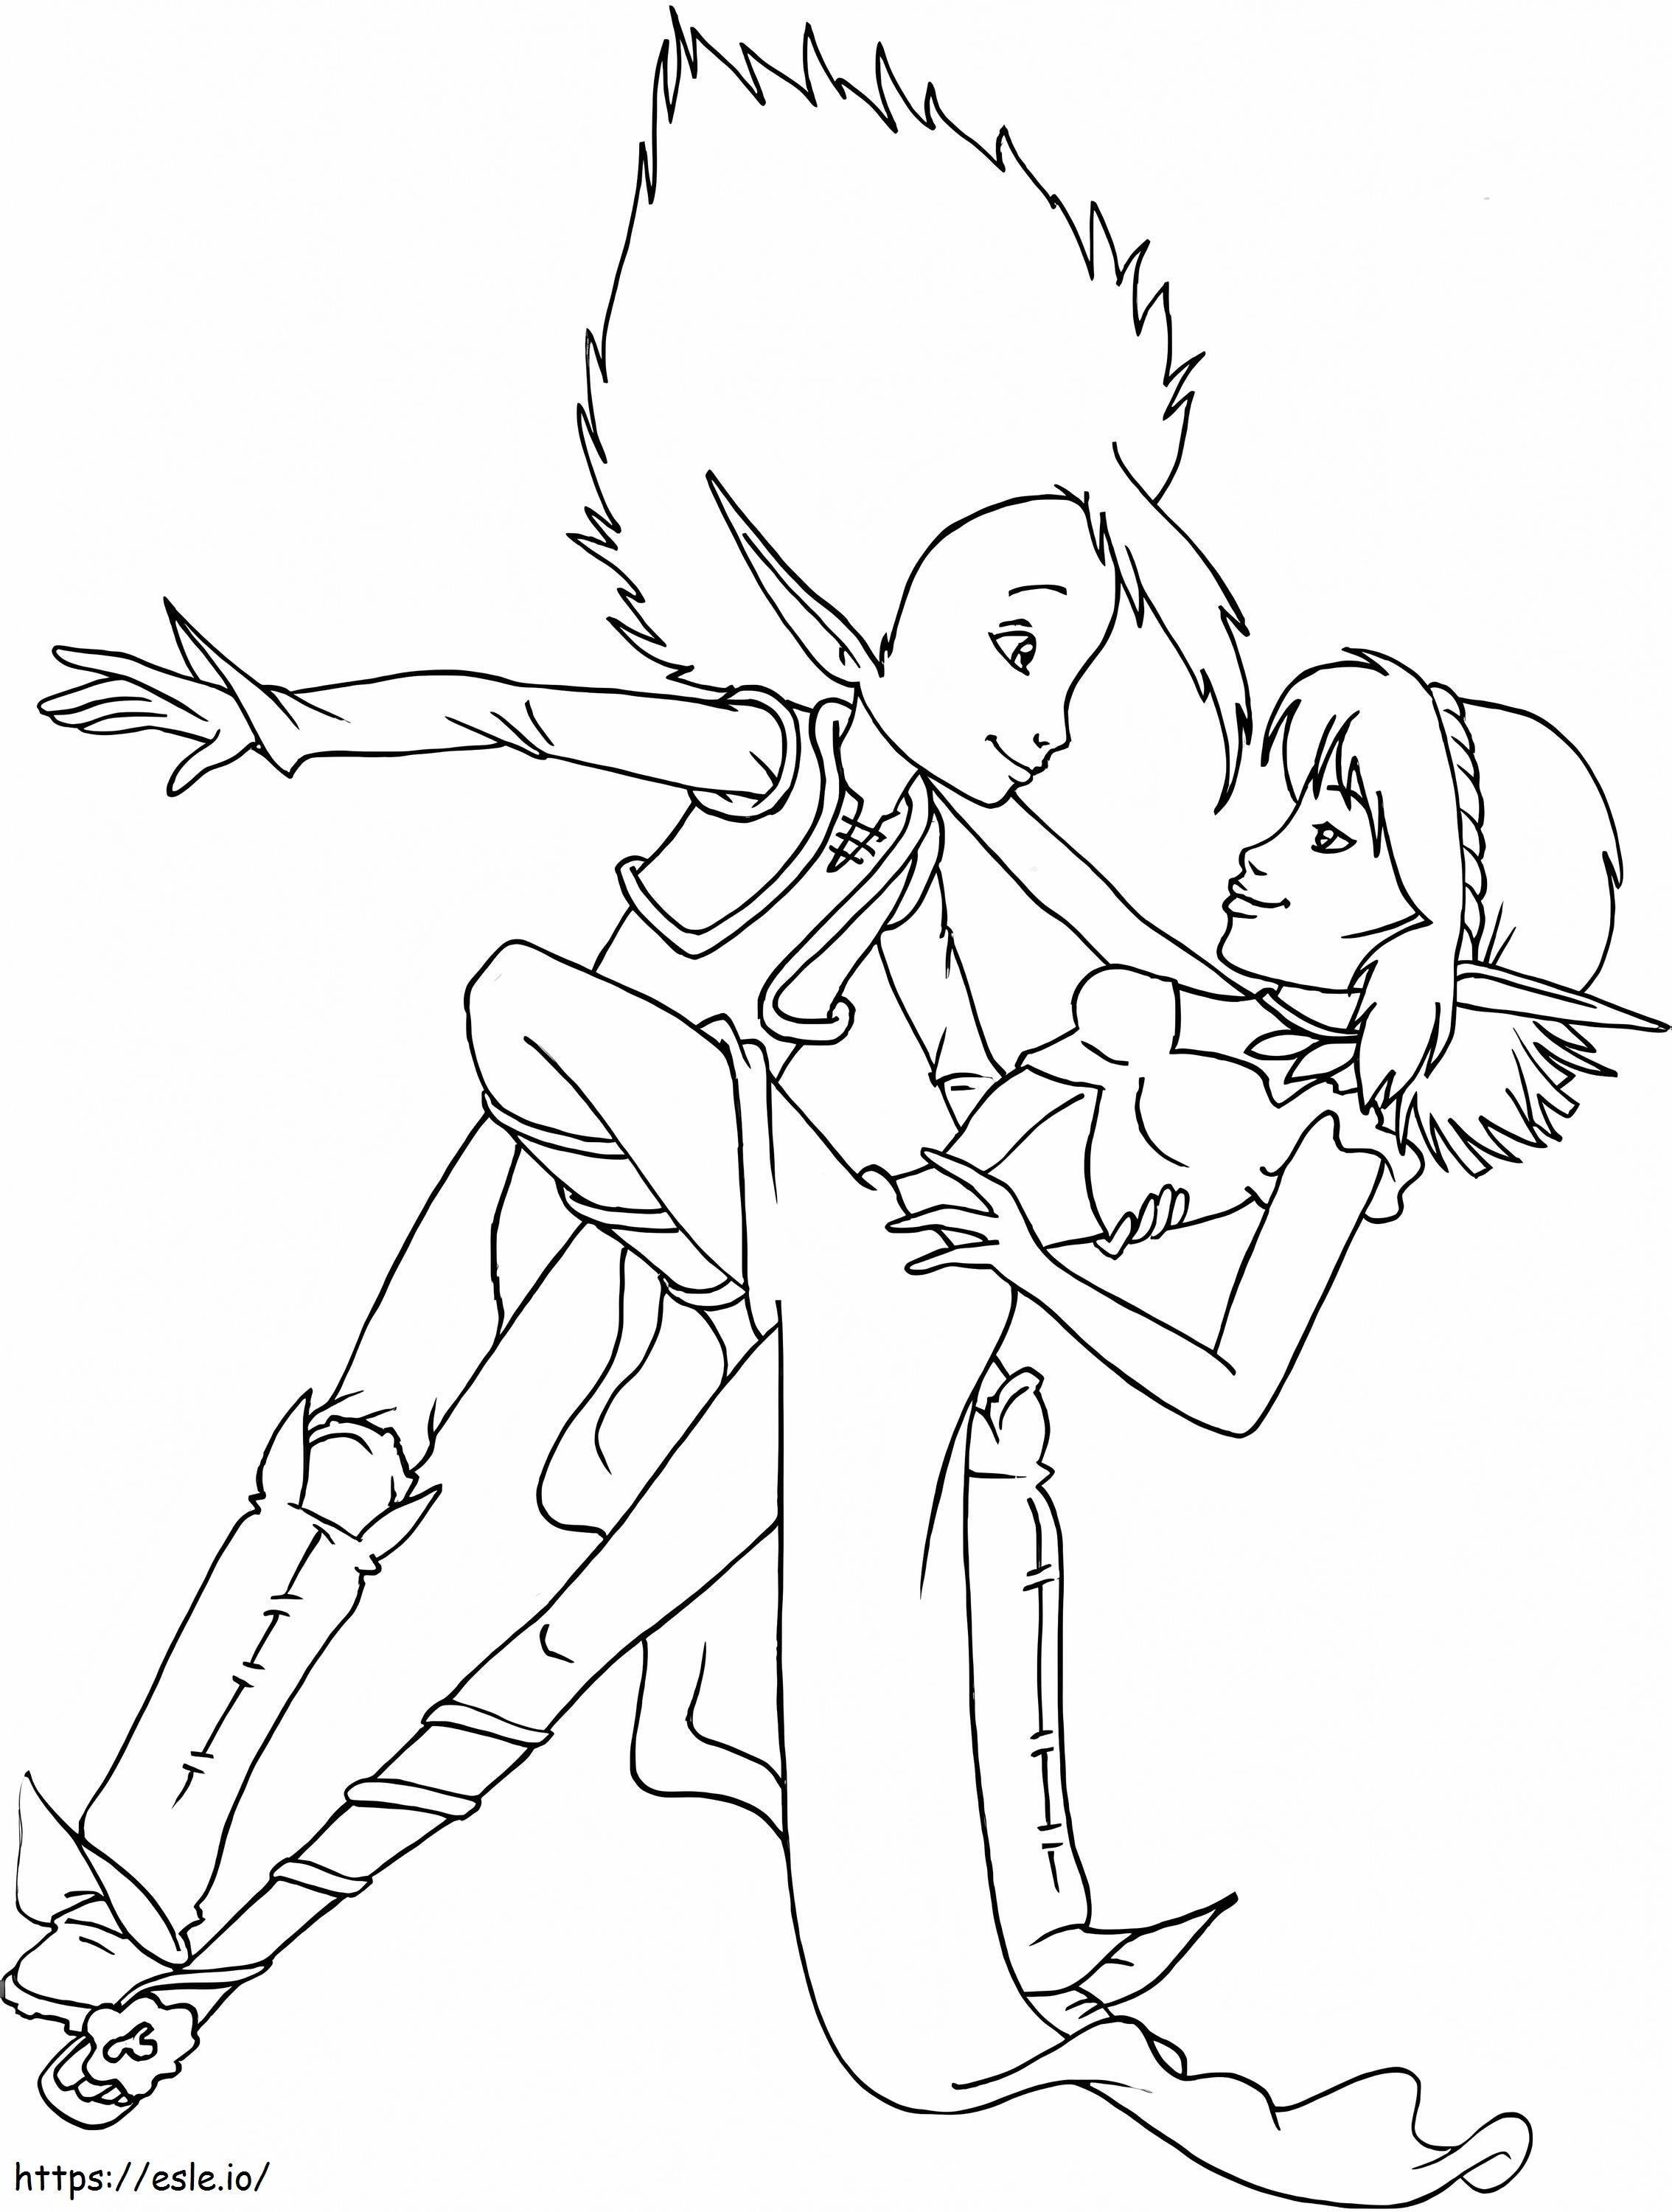 1566891982 Arthur And Selenia Dancing A4 coloring page